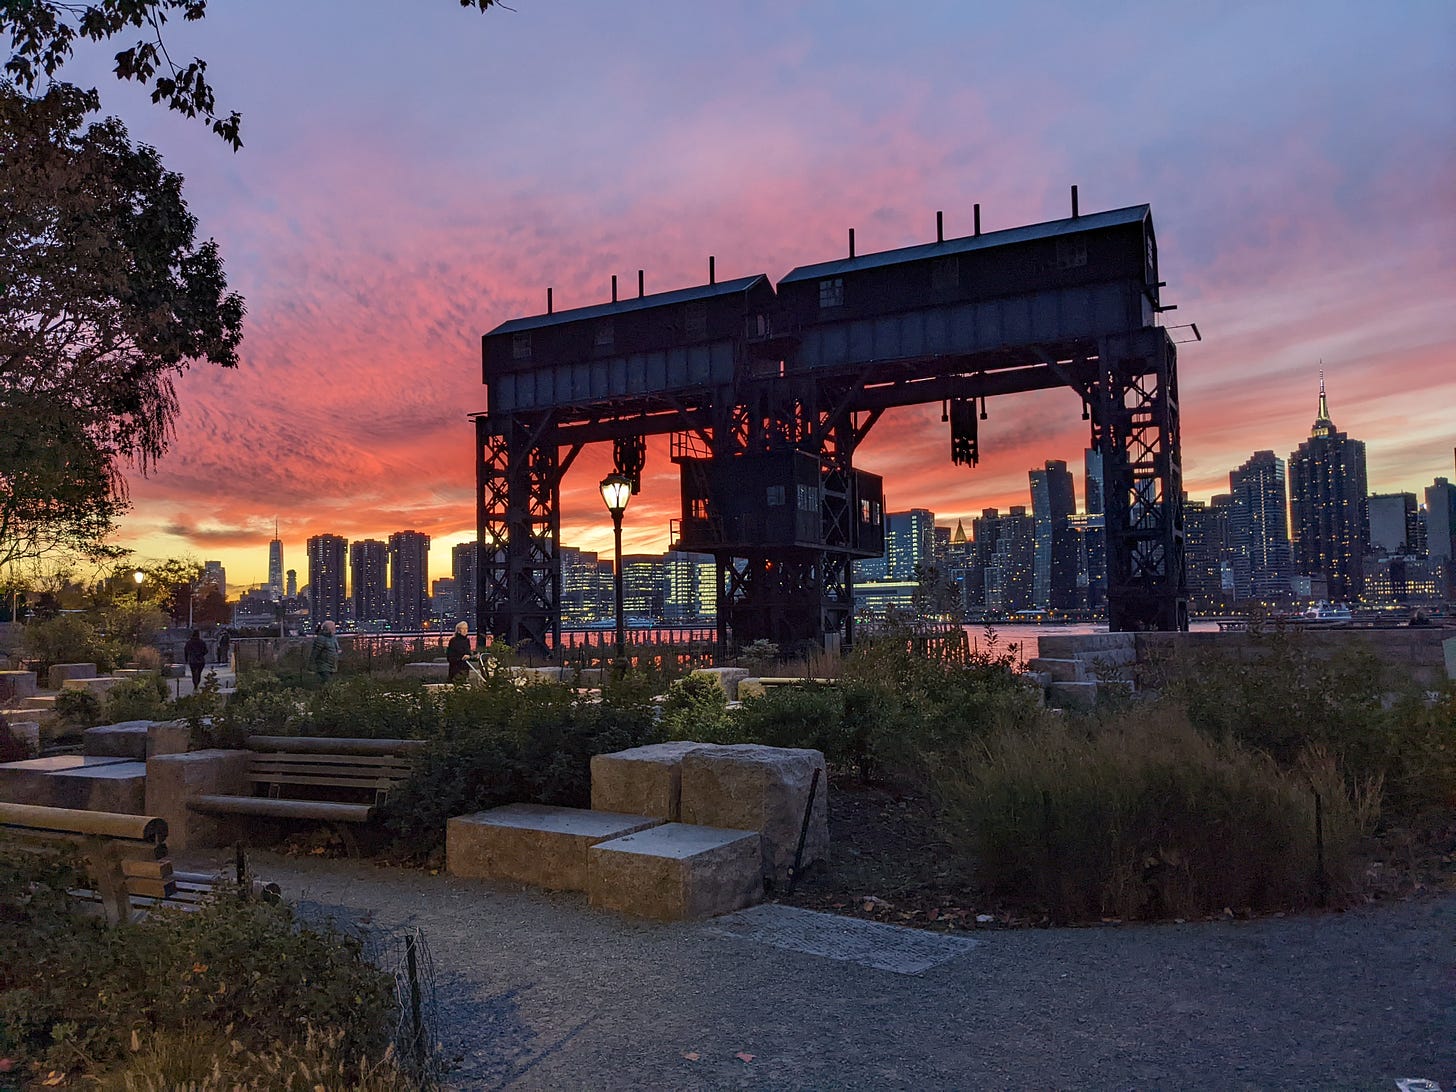 Sun set in Hunters Point Park. An industrial crane stands in the foreground, in the background the river and New York City skyline.